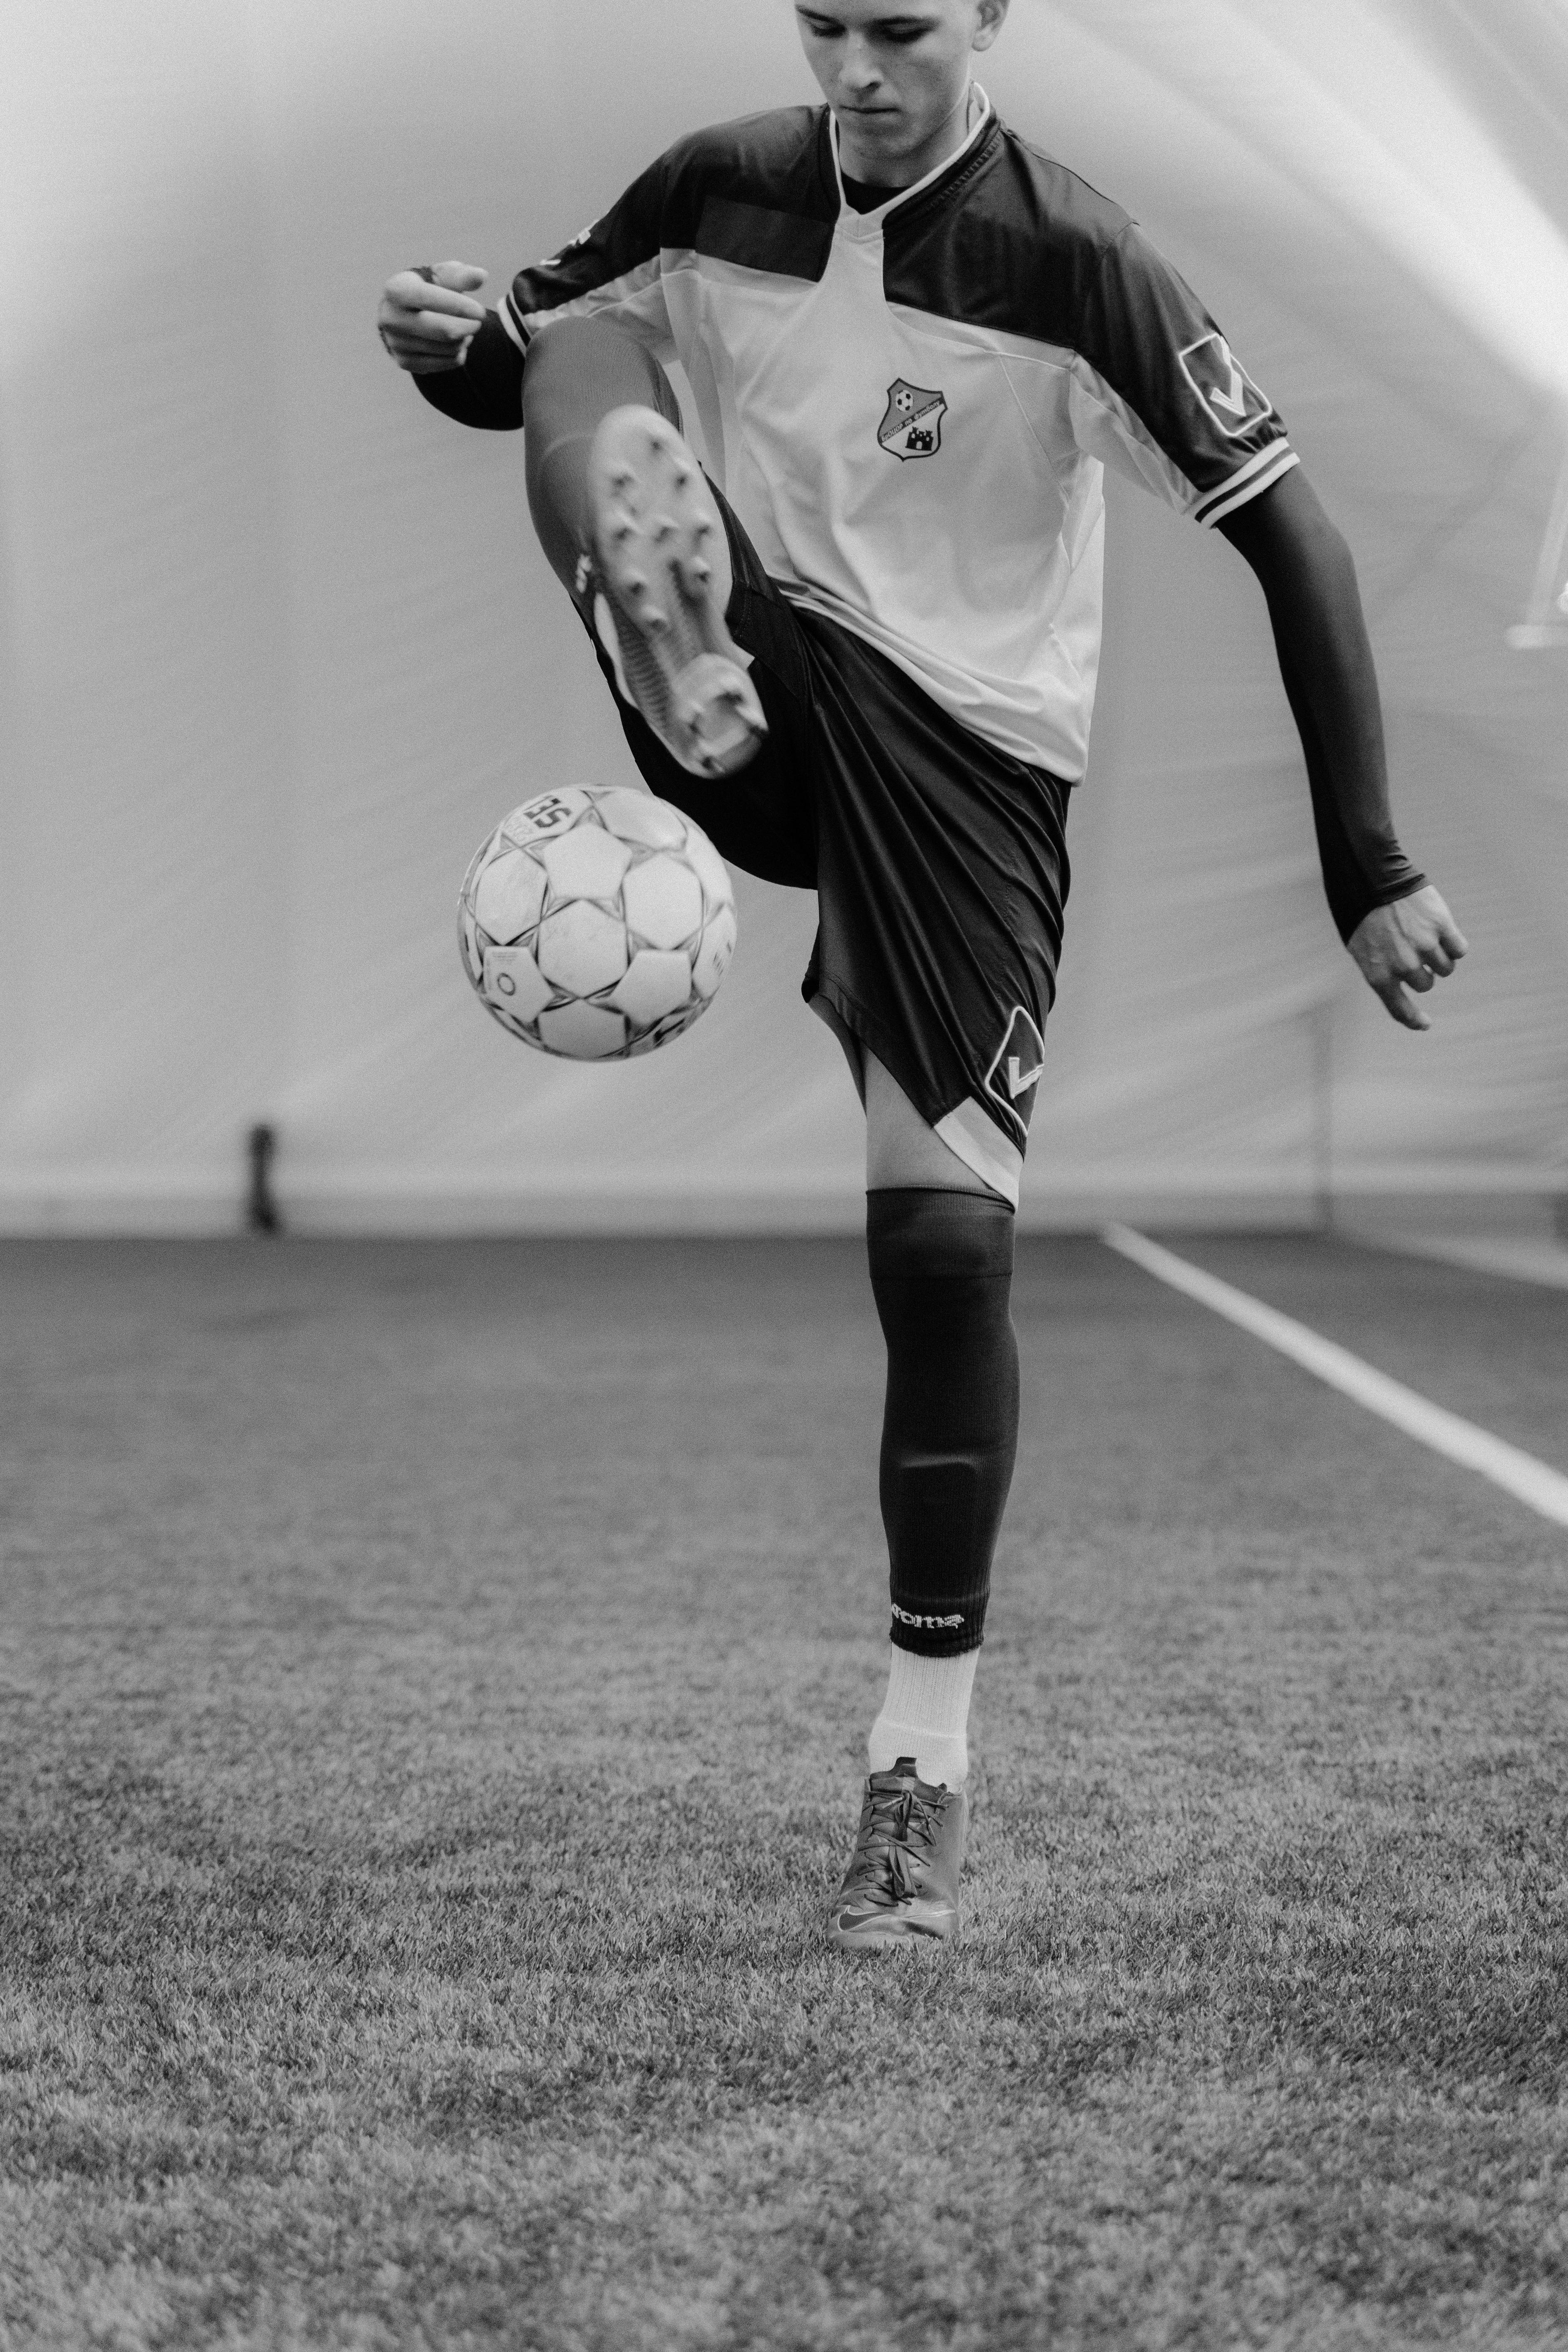 man in white and black soccer jersey kicking a soccer ball